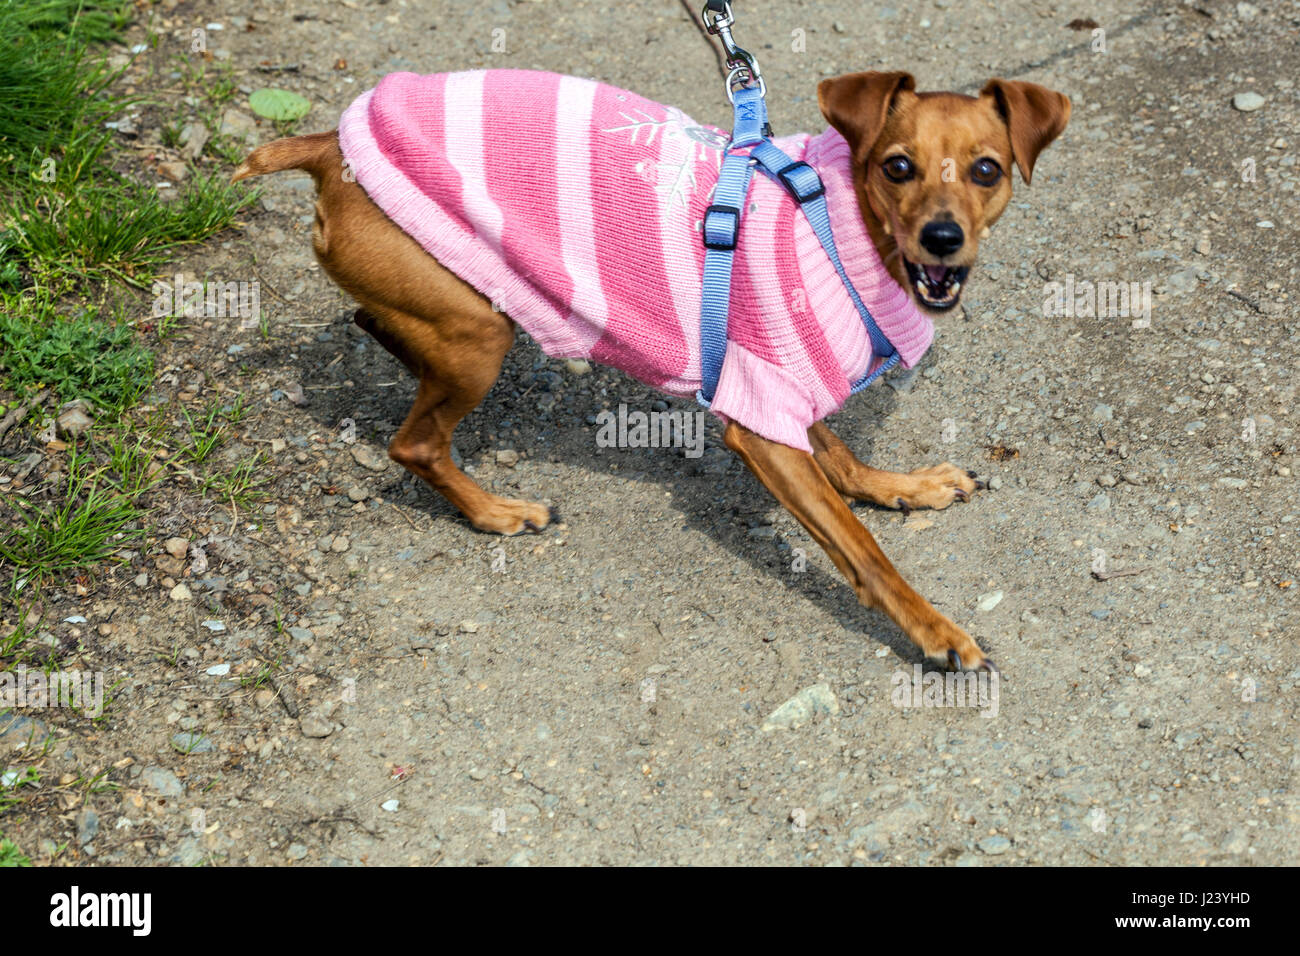 An angry dog on a leash in a pink suit barking Stock Photo